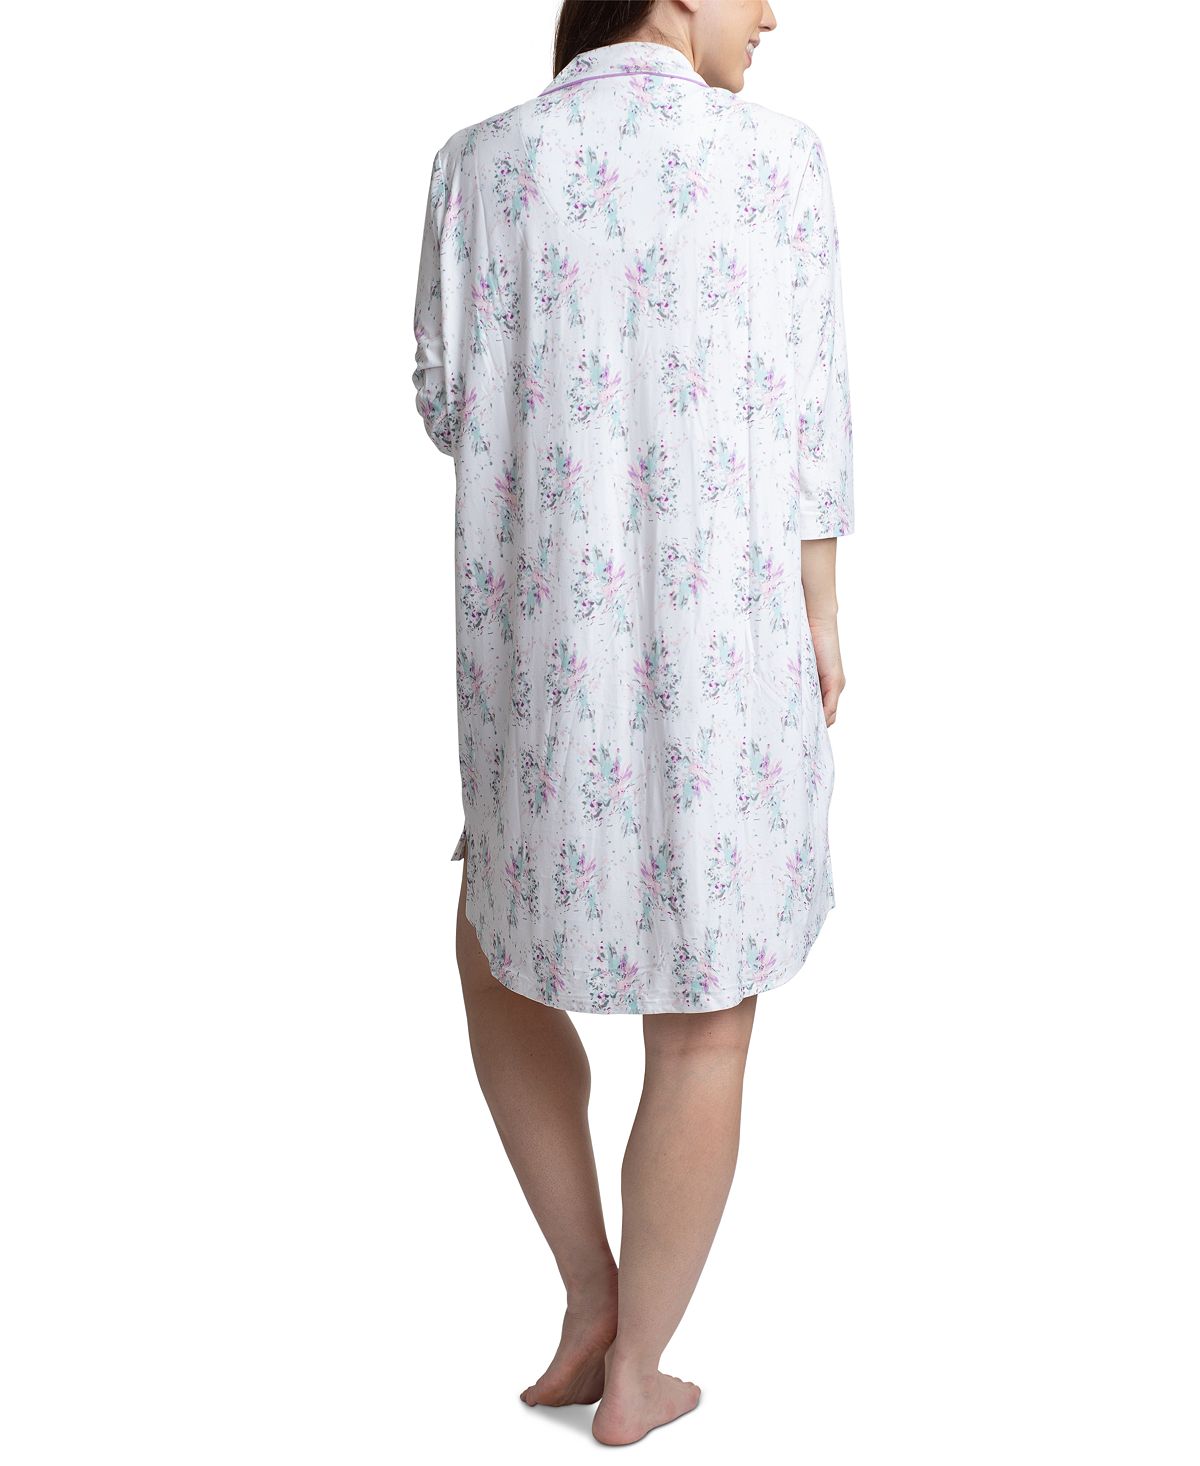 Hanes  printed Notch Collar Sleepshirt Nightgown Painted Floral